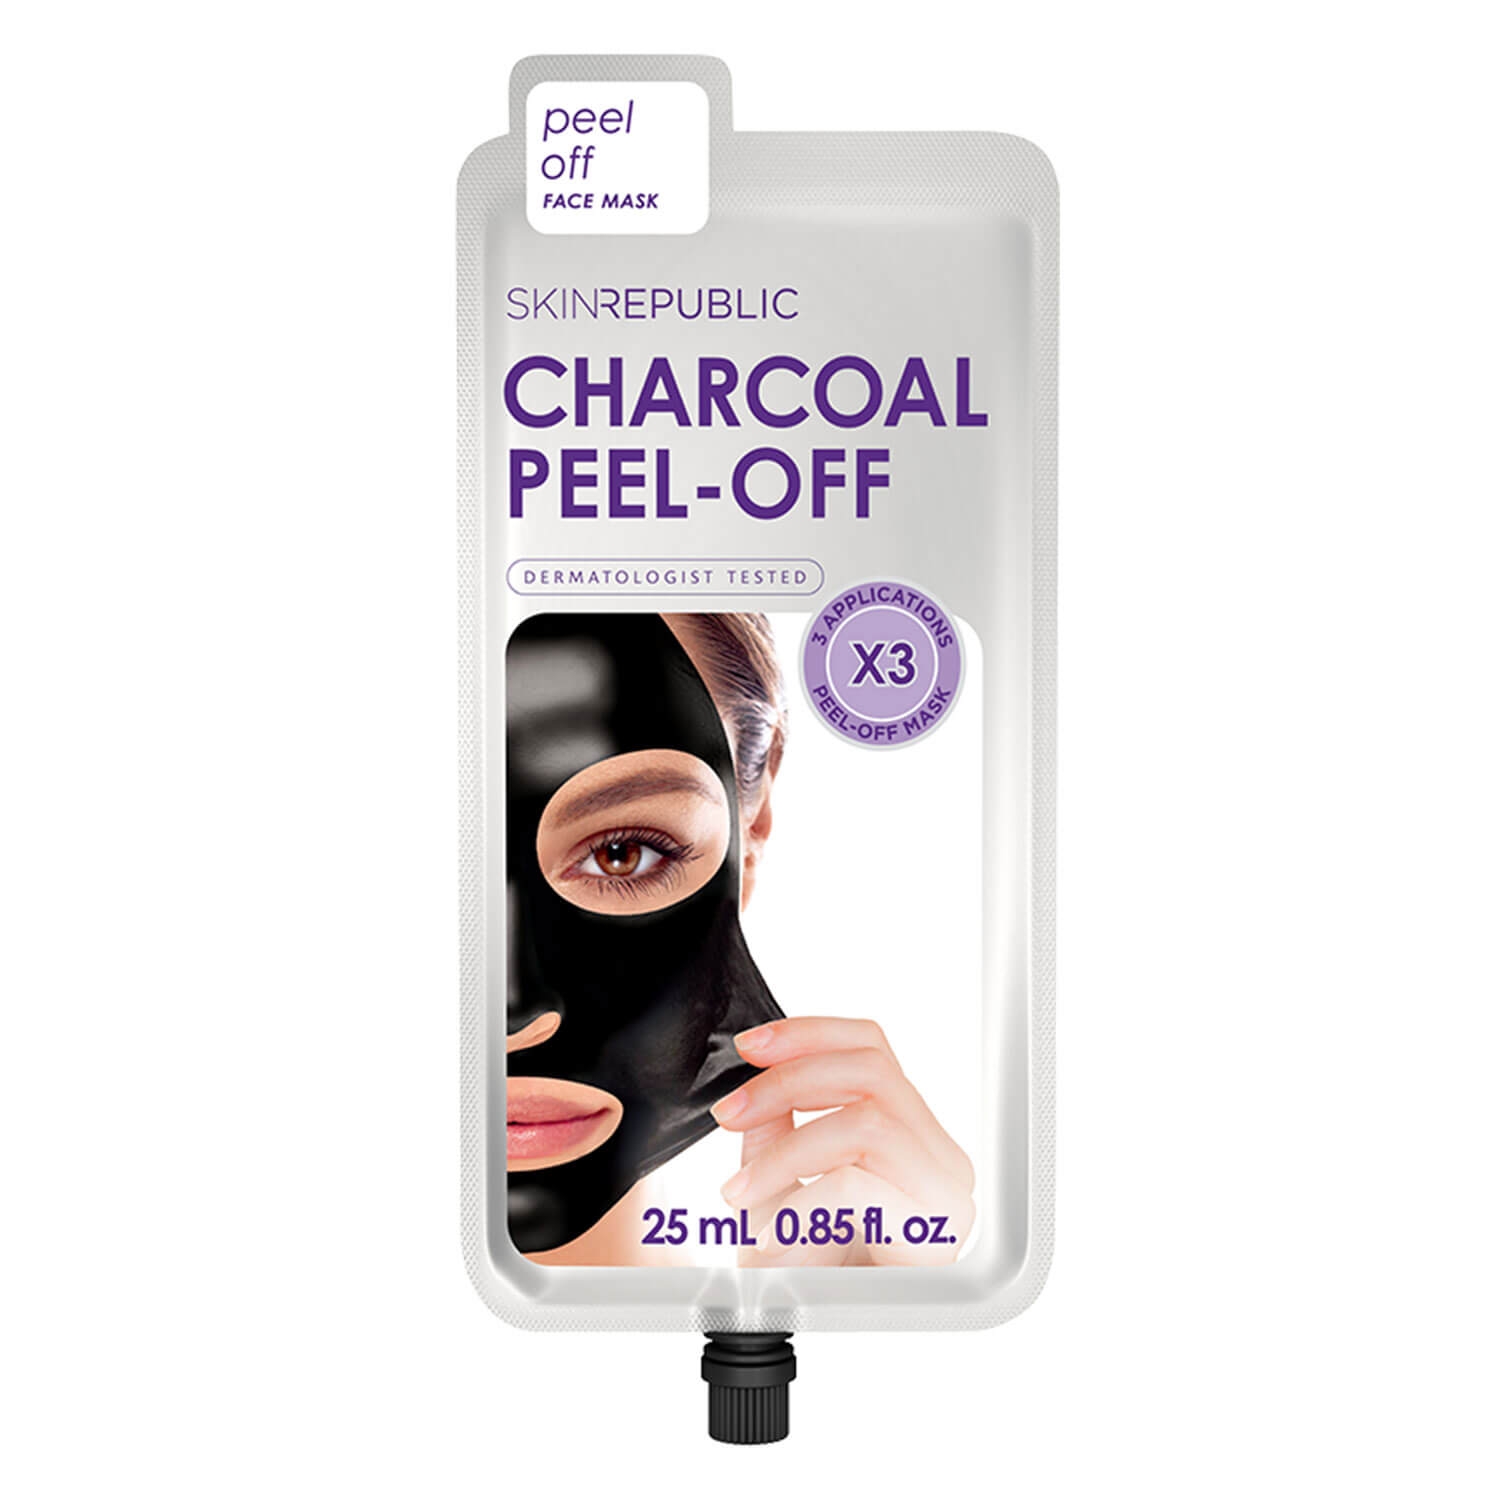 Product image from Skin Republic - Charcoal Peel-Off Face Mask